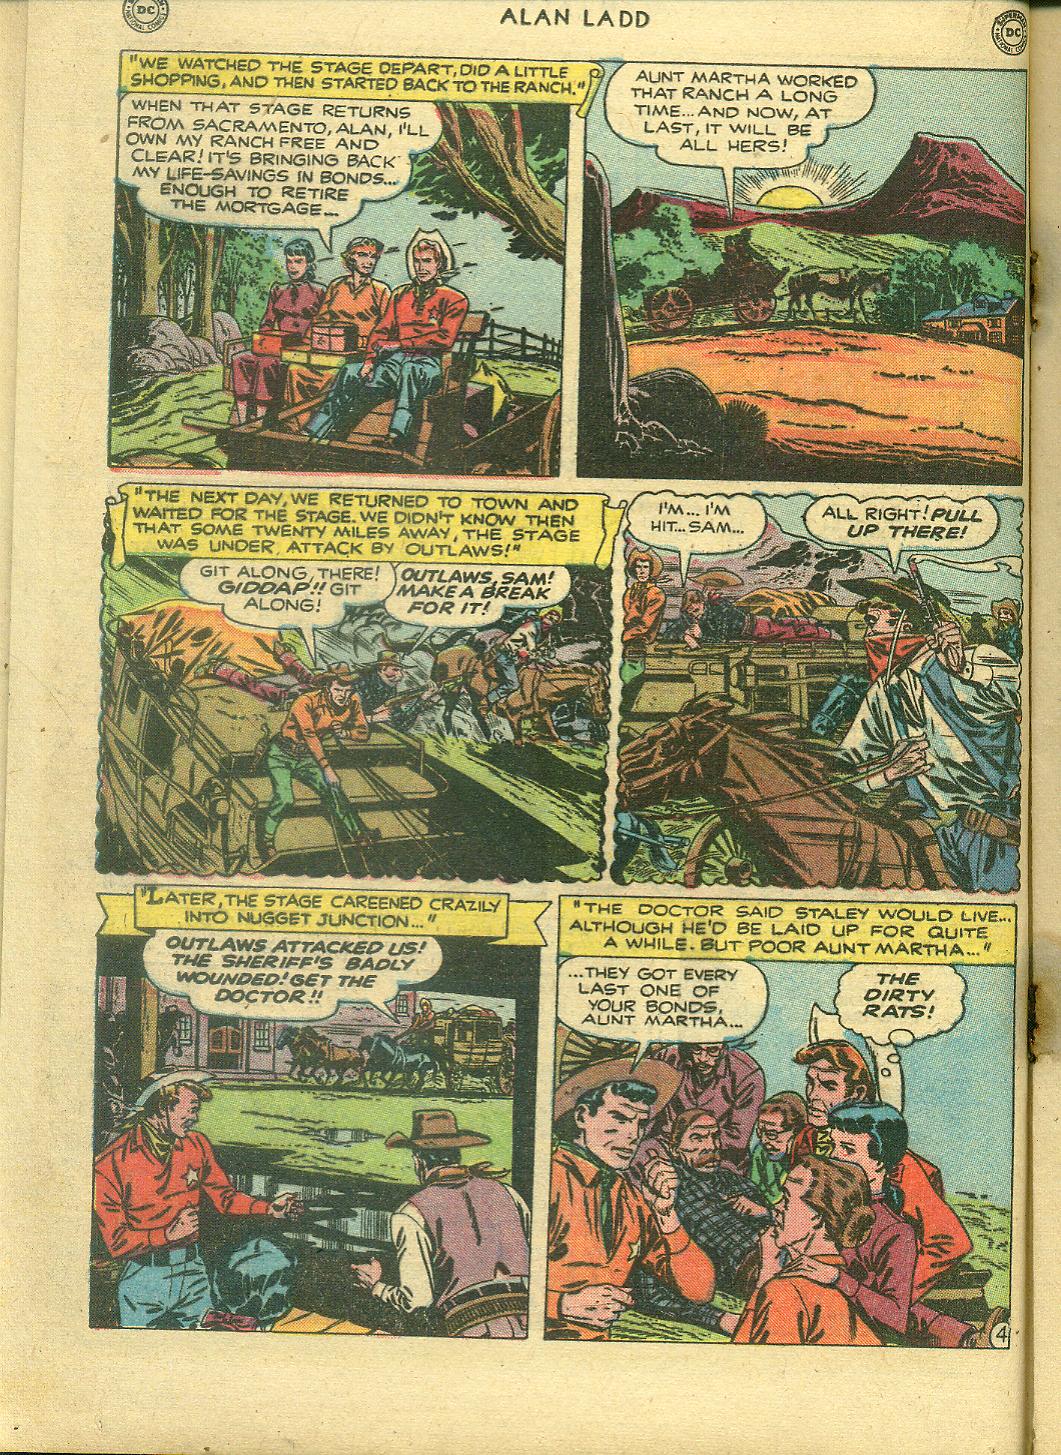 Read online Adventures of Alan Ladd comic -  Issue #2 - 24